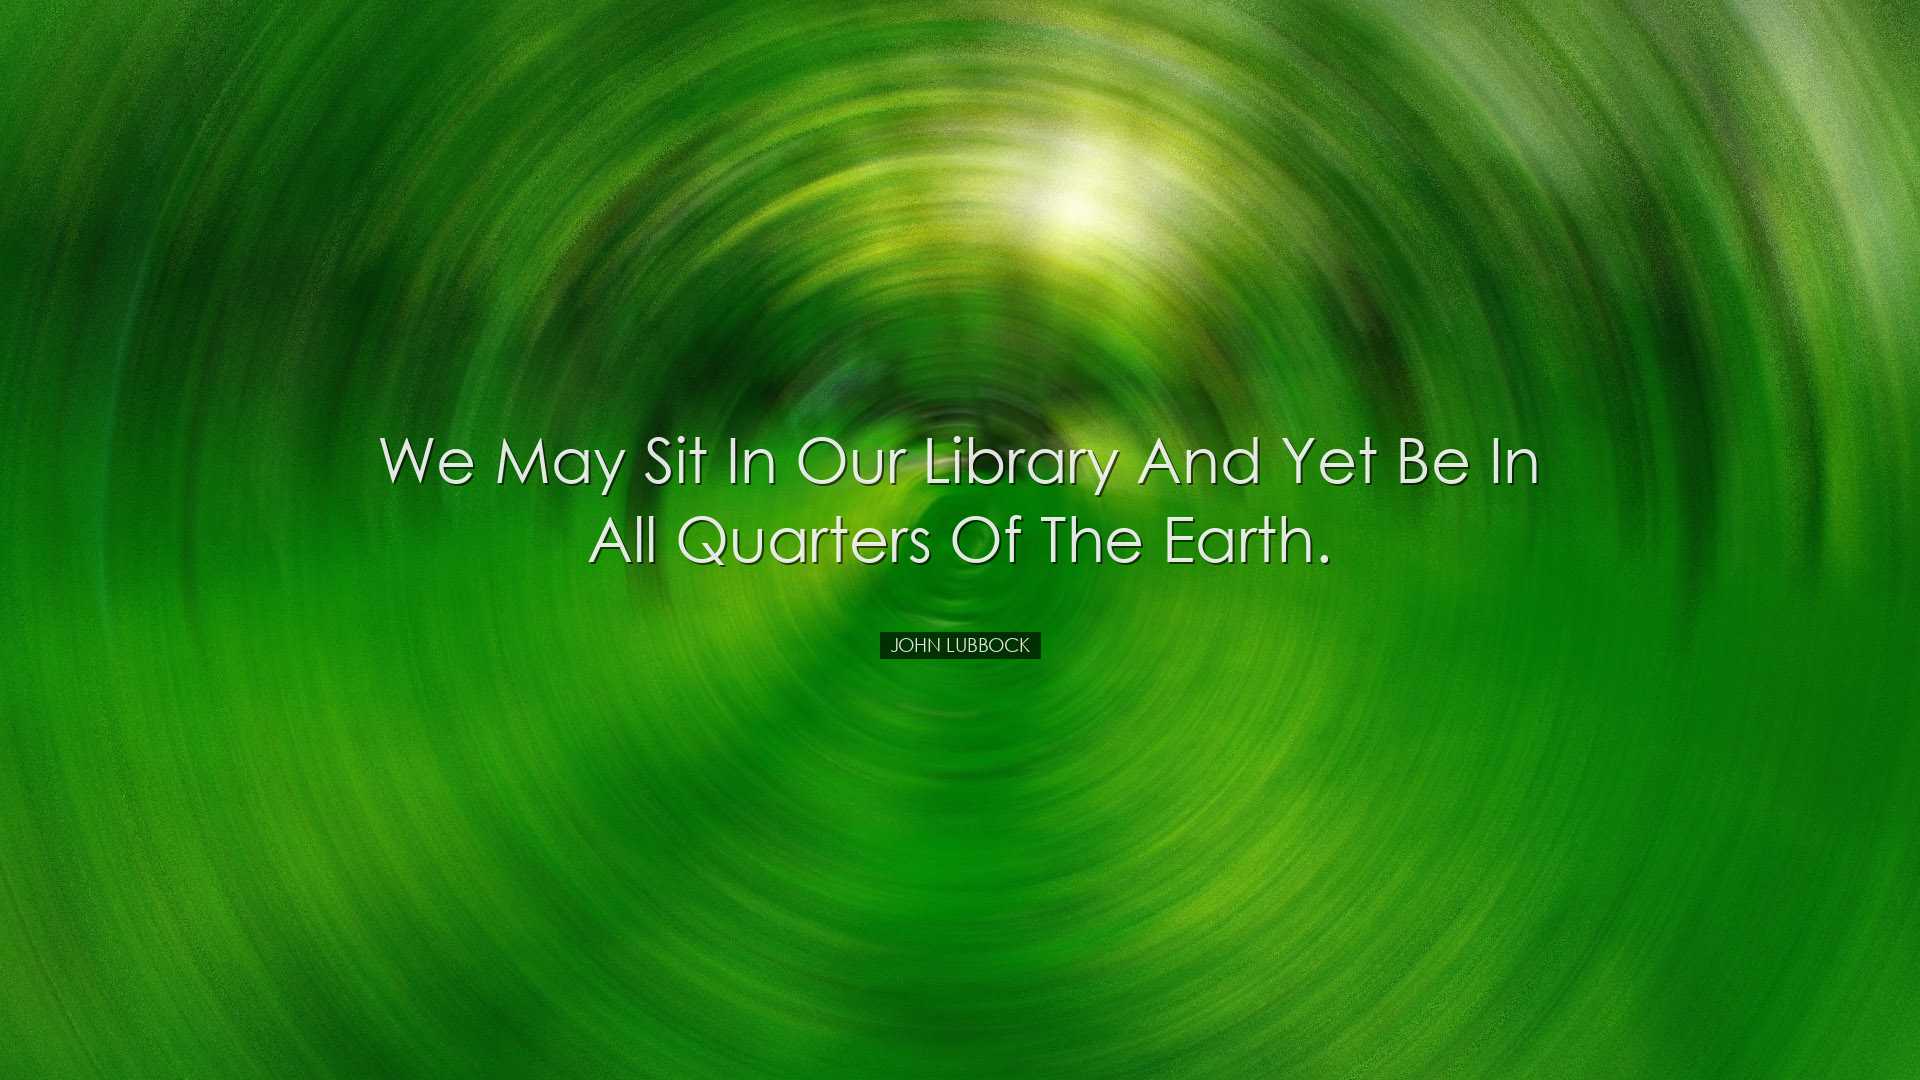 We may sit in our library and yet be in all quarters of the earth.